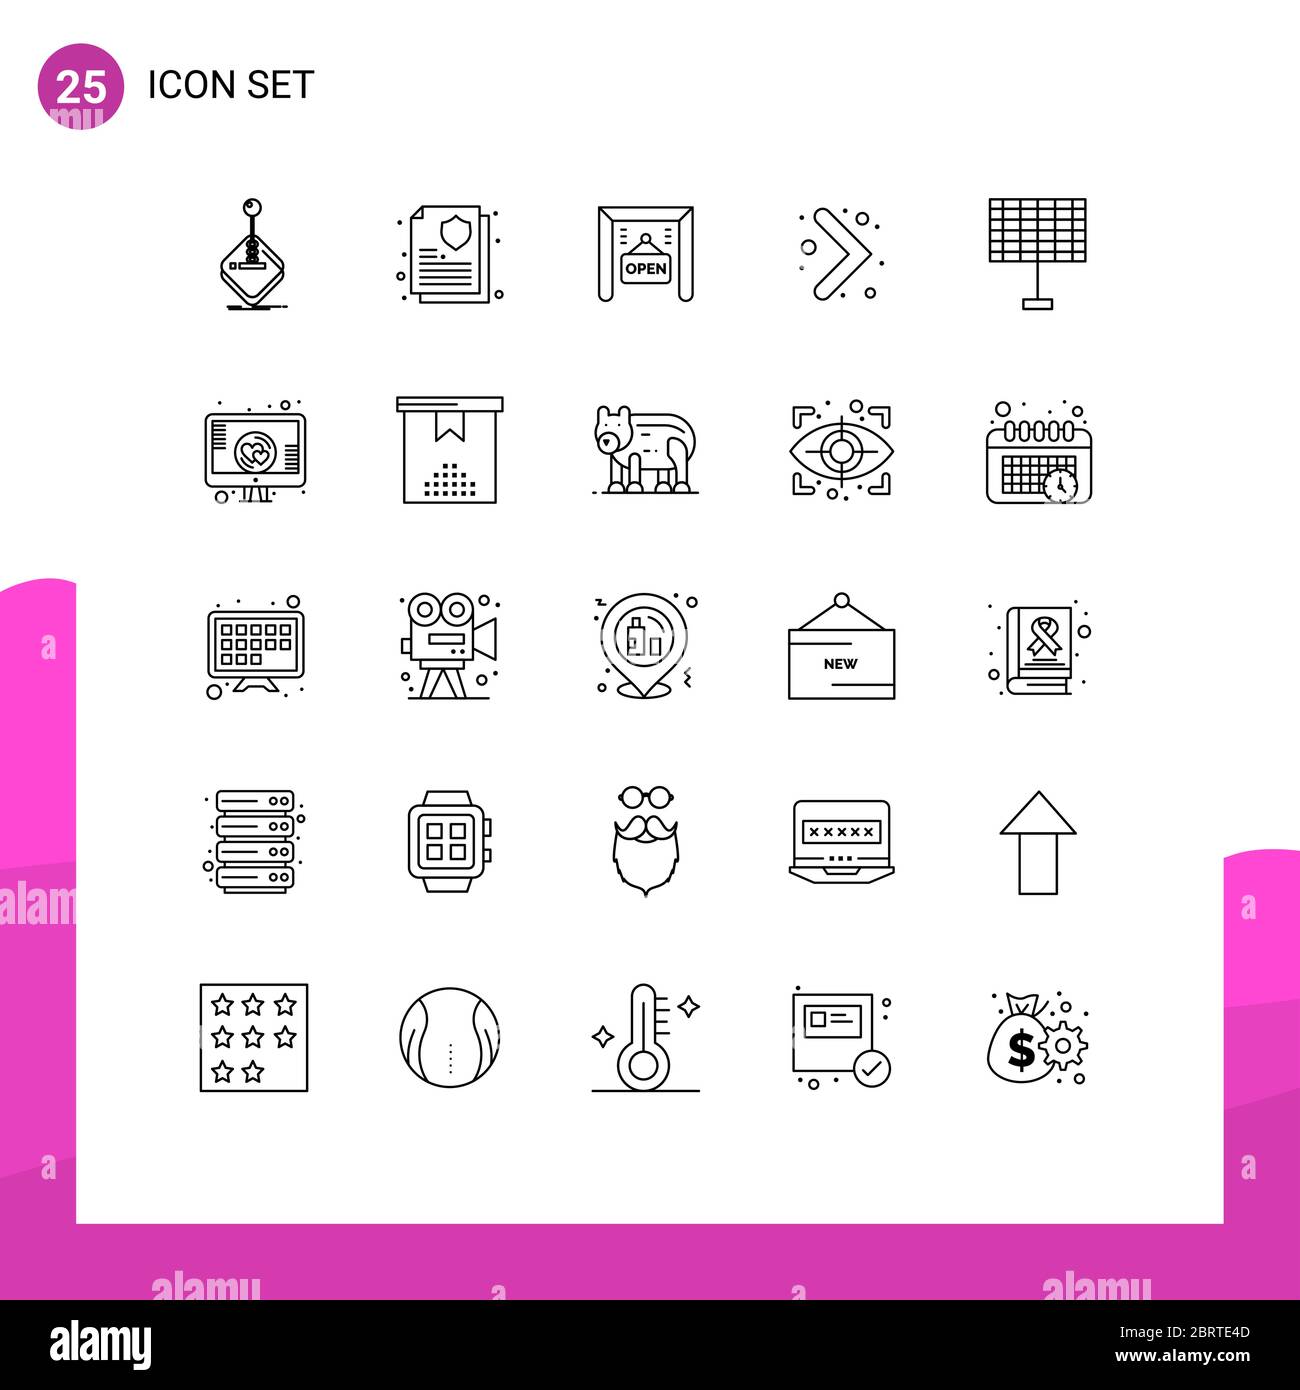 25 Creative Icons Modern Signs and Symbols of love, eco, ecommerce, battery, navigation Editable Vector Design Elements Stock Vector